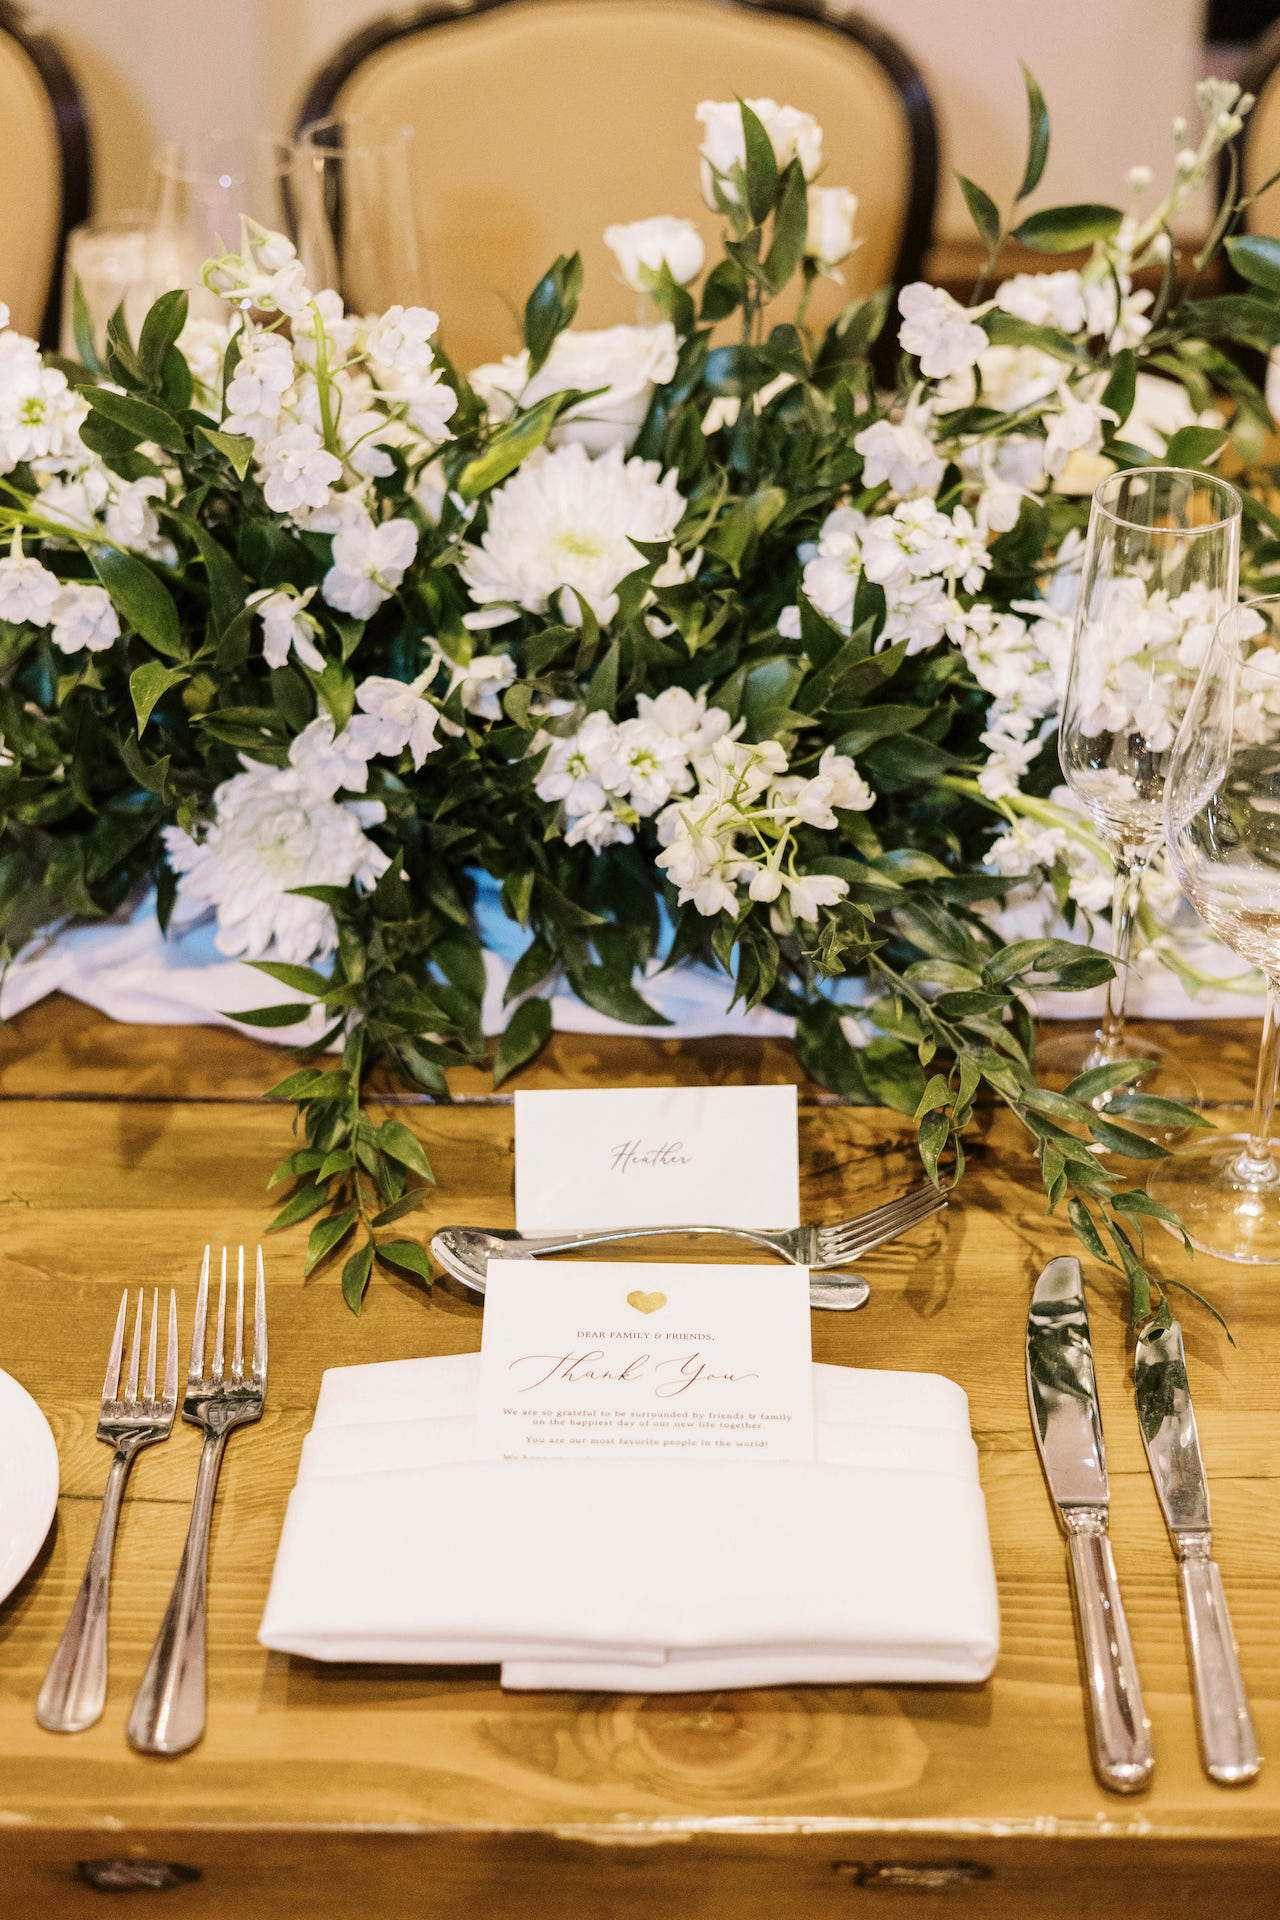 Wedding reception place setting with lush white flowers and greenery centerpiece.